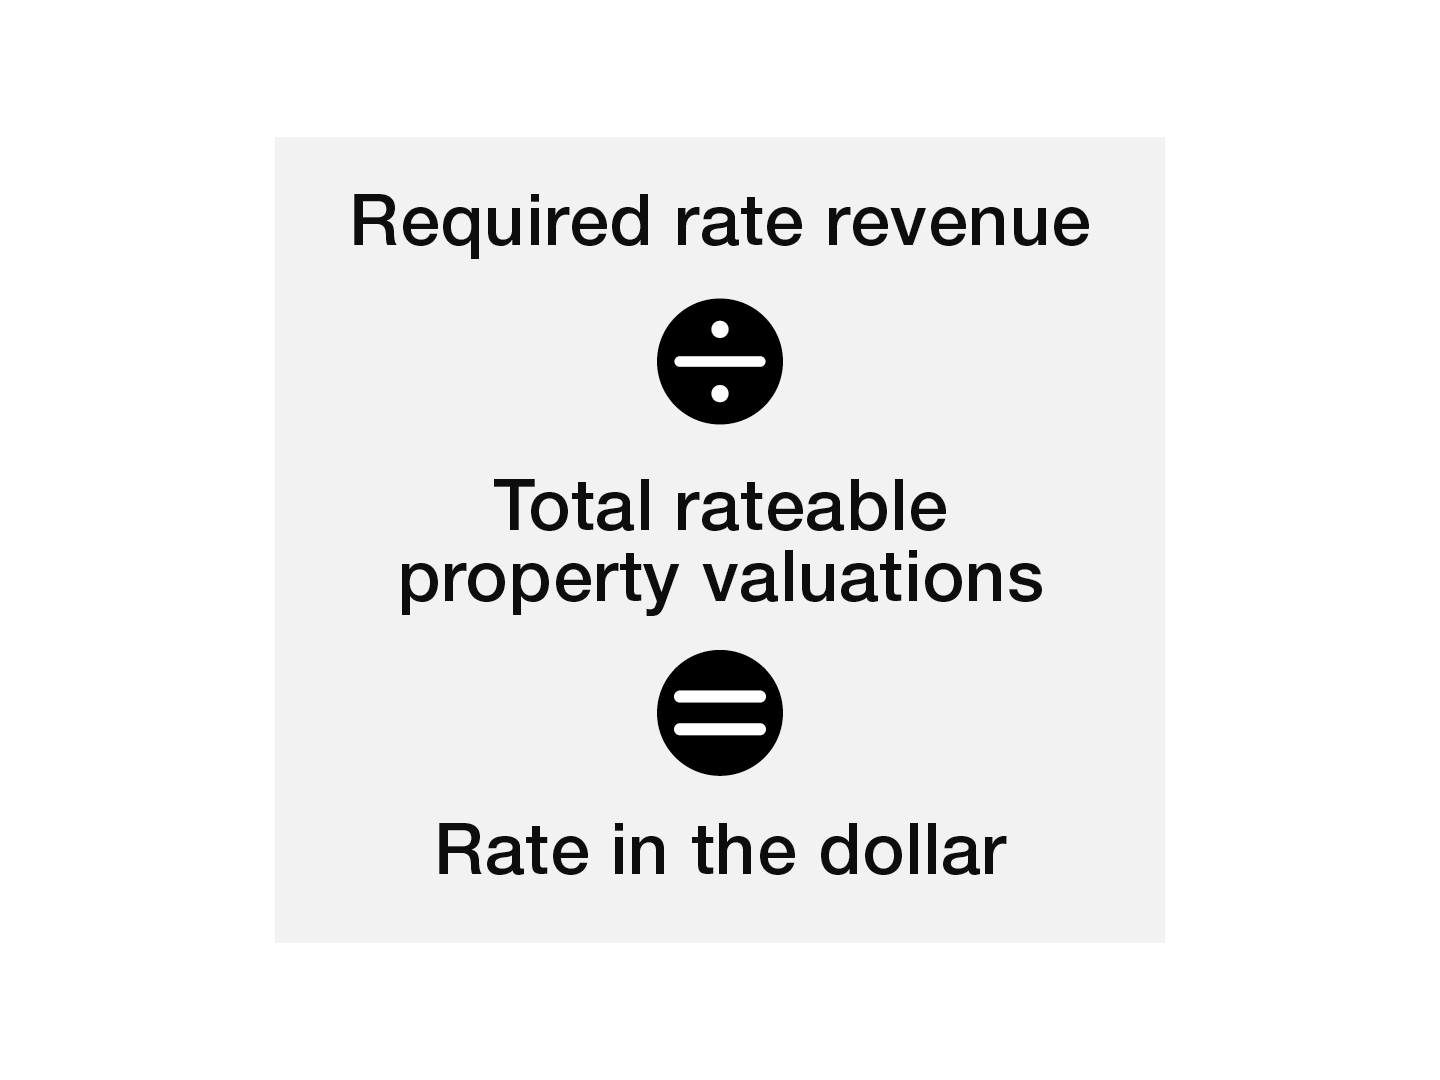 Required rate revenue divided by the total rateable property valuations equals the rate in the dollar